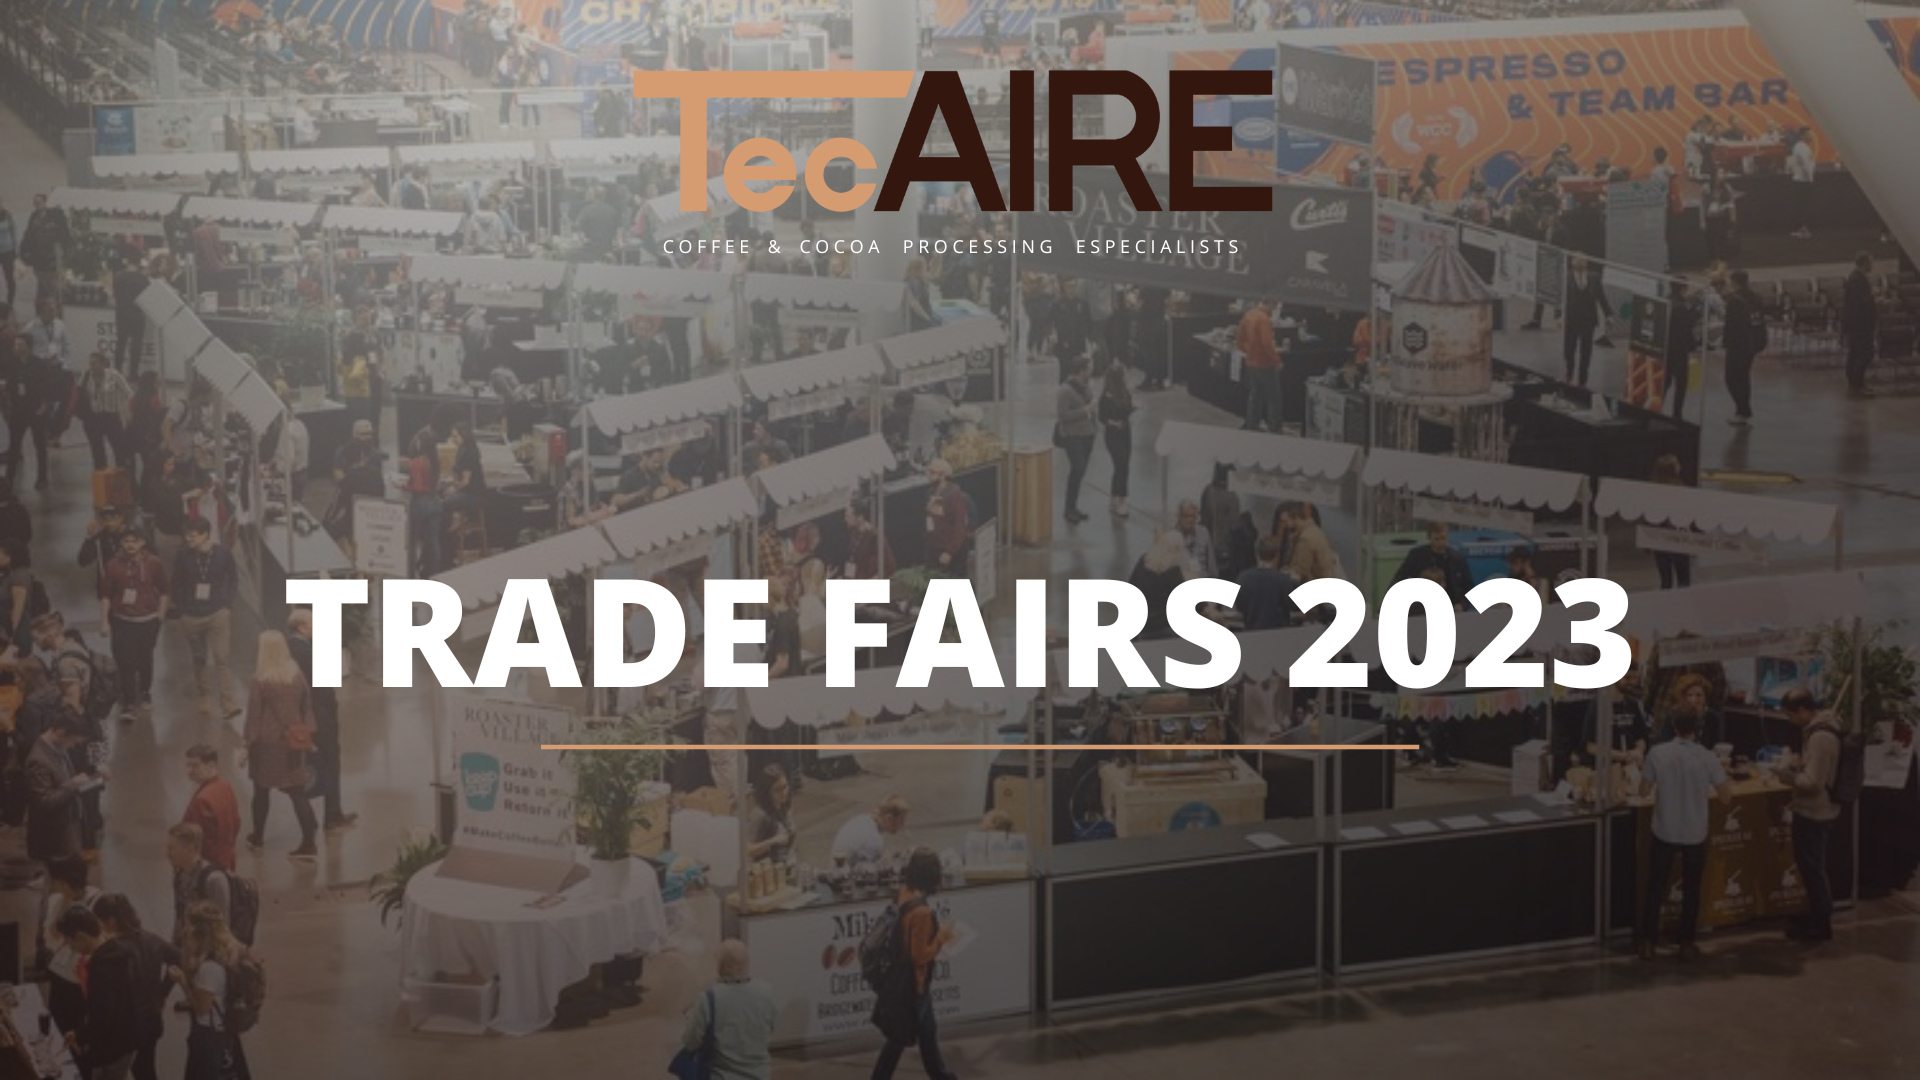 A total of 5 international trade fairs where you can visit TecAIRE